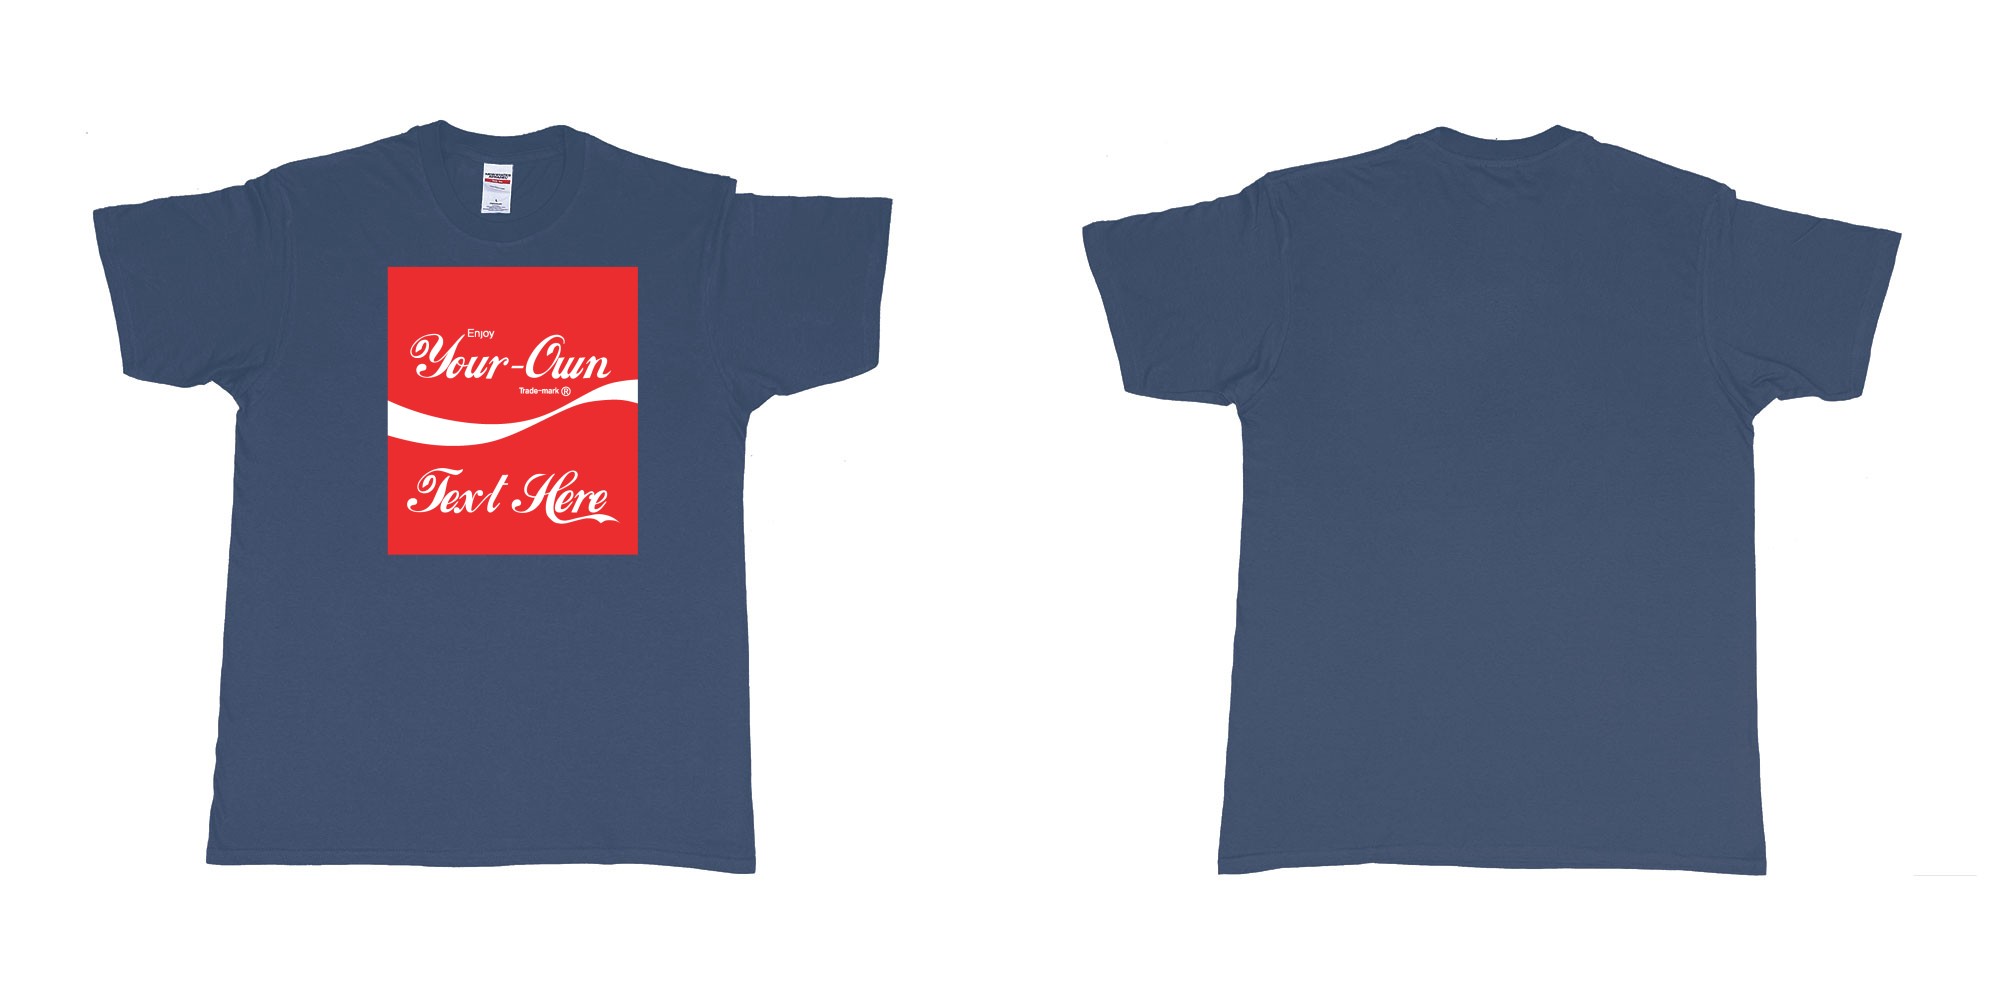 Custom tshirt design Coca Cola in fabric color navy choice your own text made in Bali by The Pirate Way